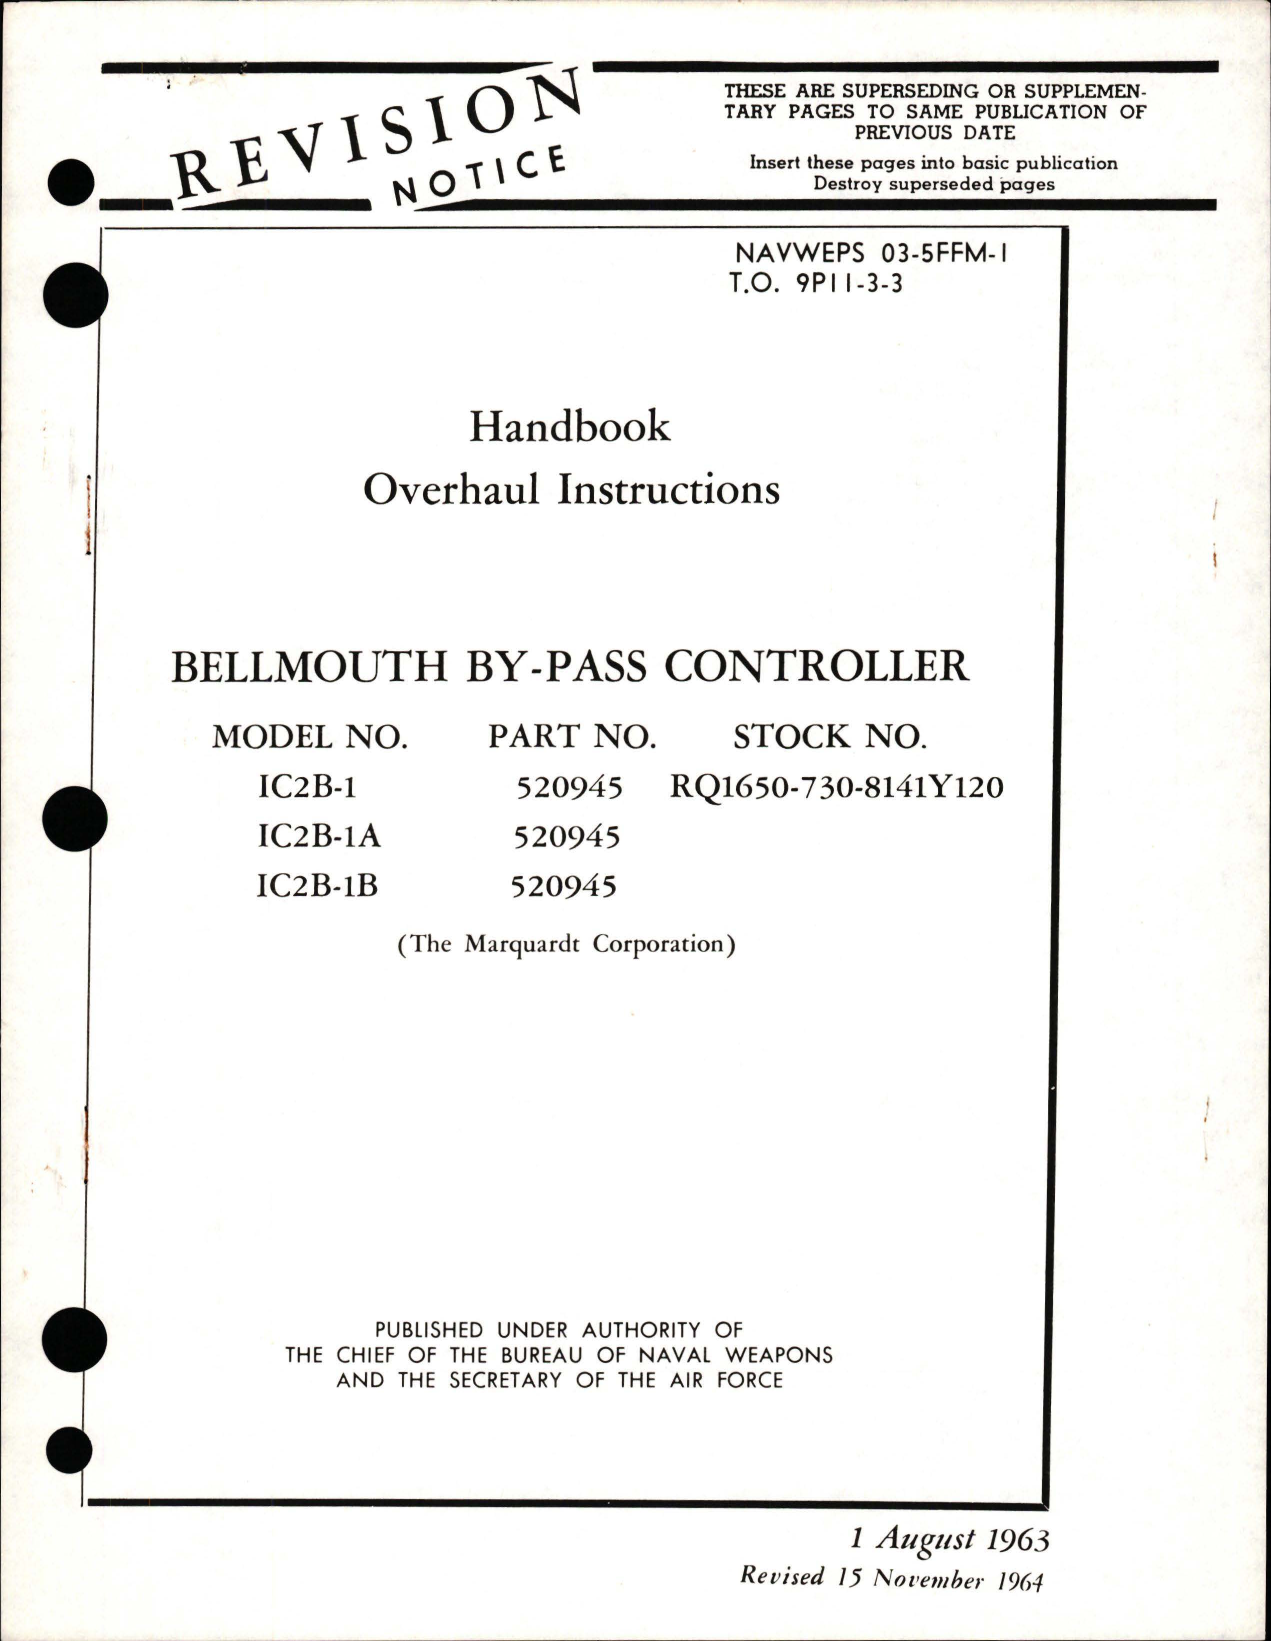 Sample page 1 from AirCorps Library document: Overhaul Instructions for Bellmouth By-Pass Controller - Models 1C2B-1, 1C2B-1A, and 1C2B-1B - Part 520945